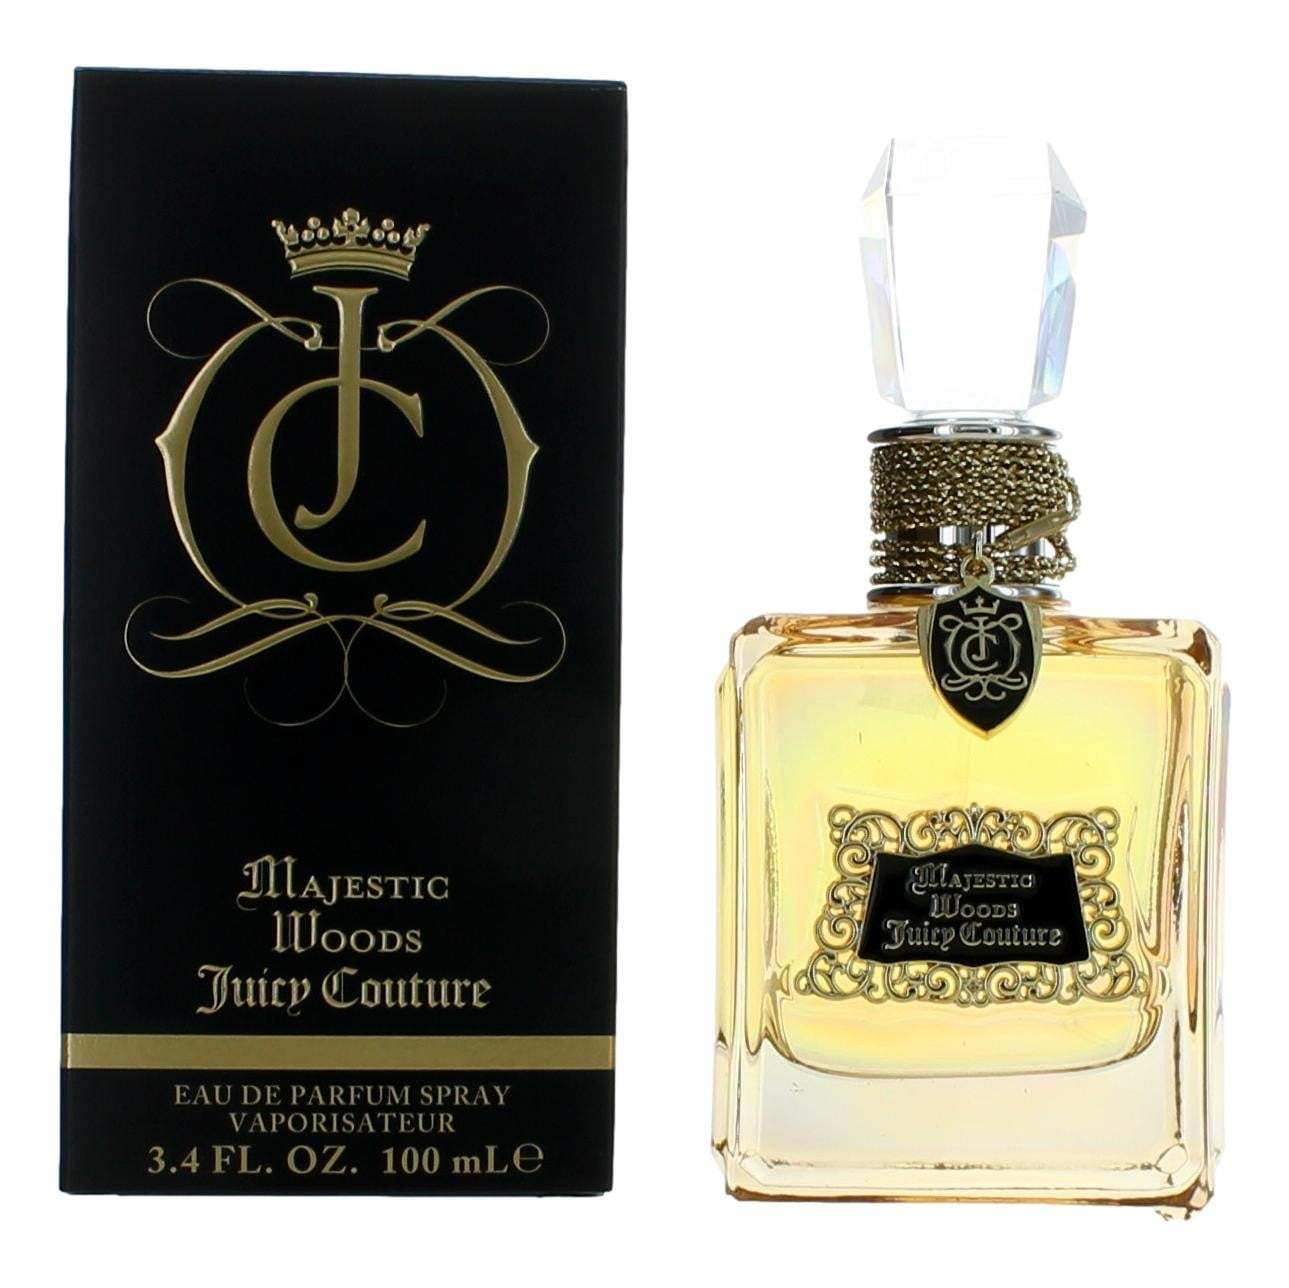 Juicy Couture Other Home Decor